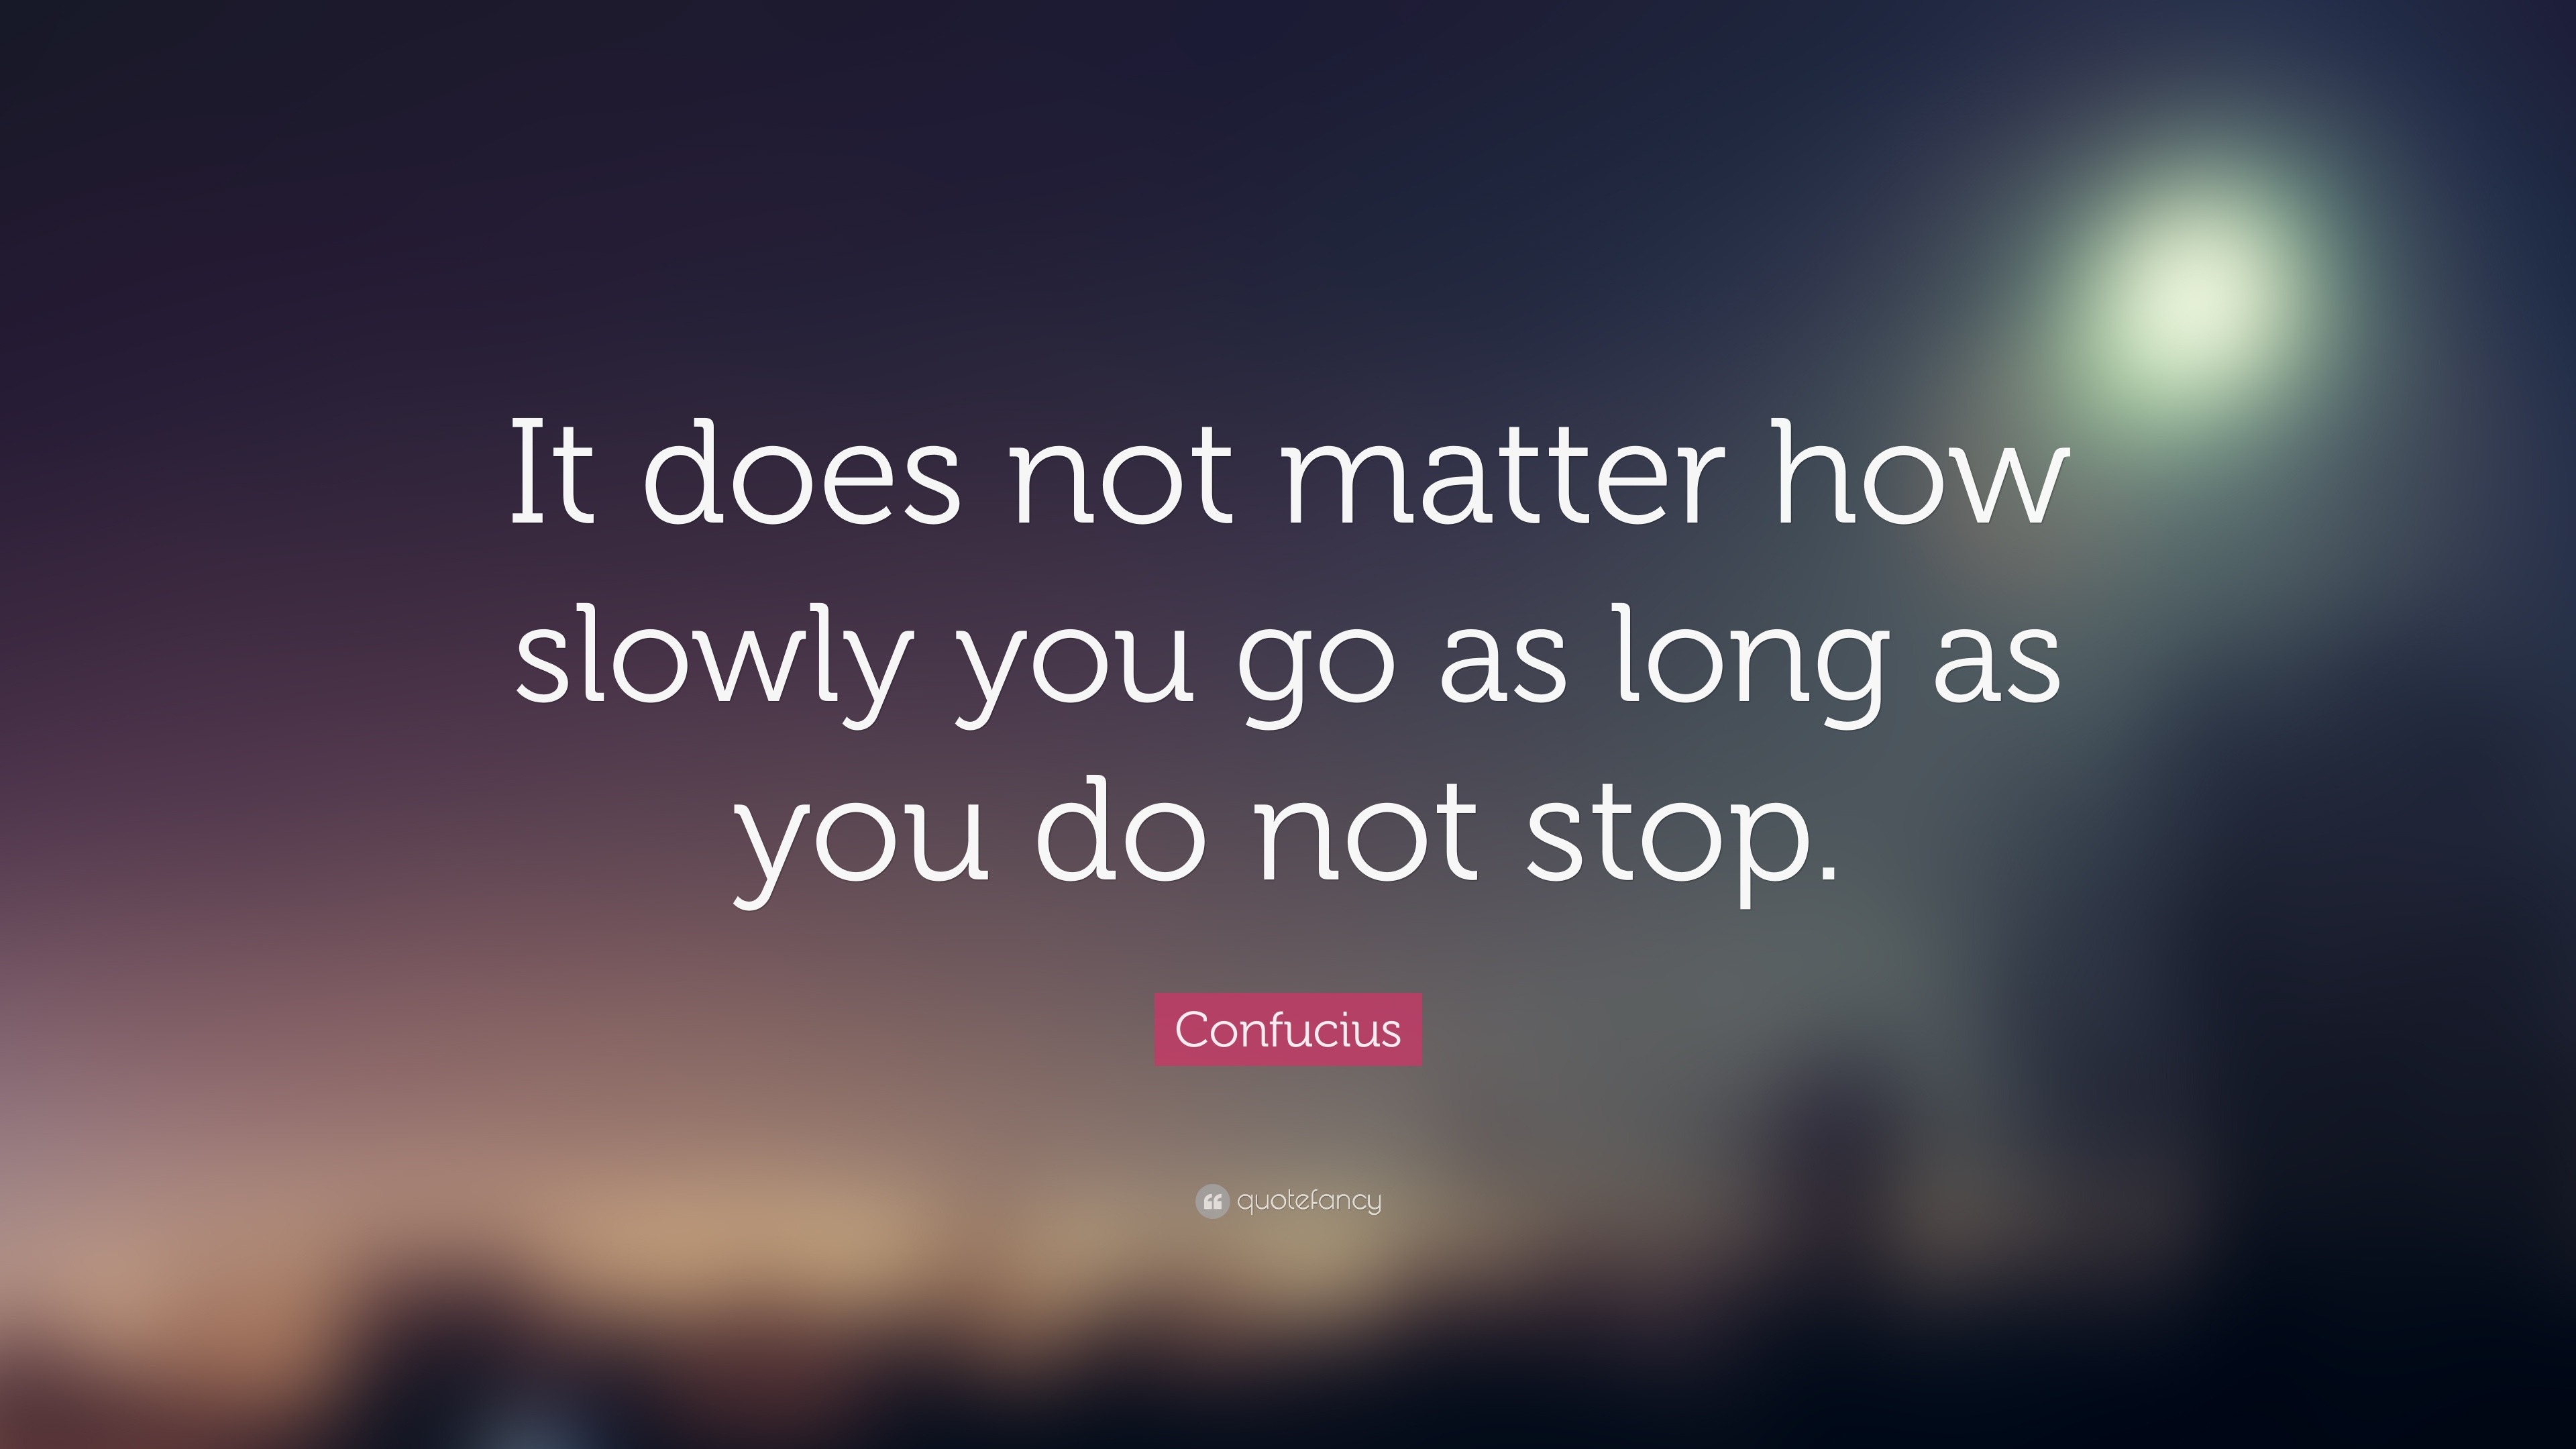 Image result for it does not matter how slowly you go as long as you do not stop